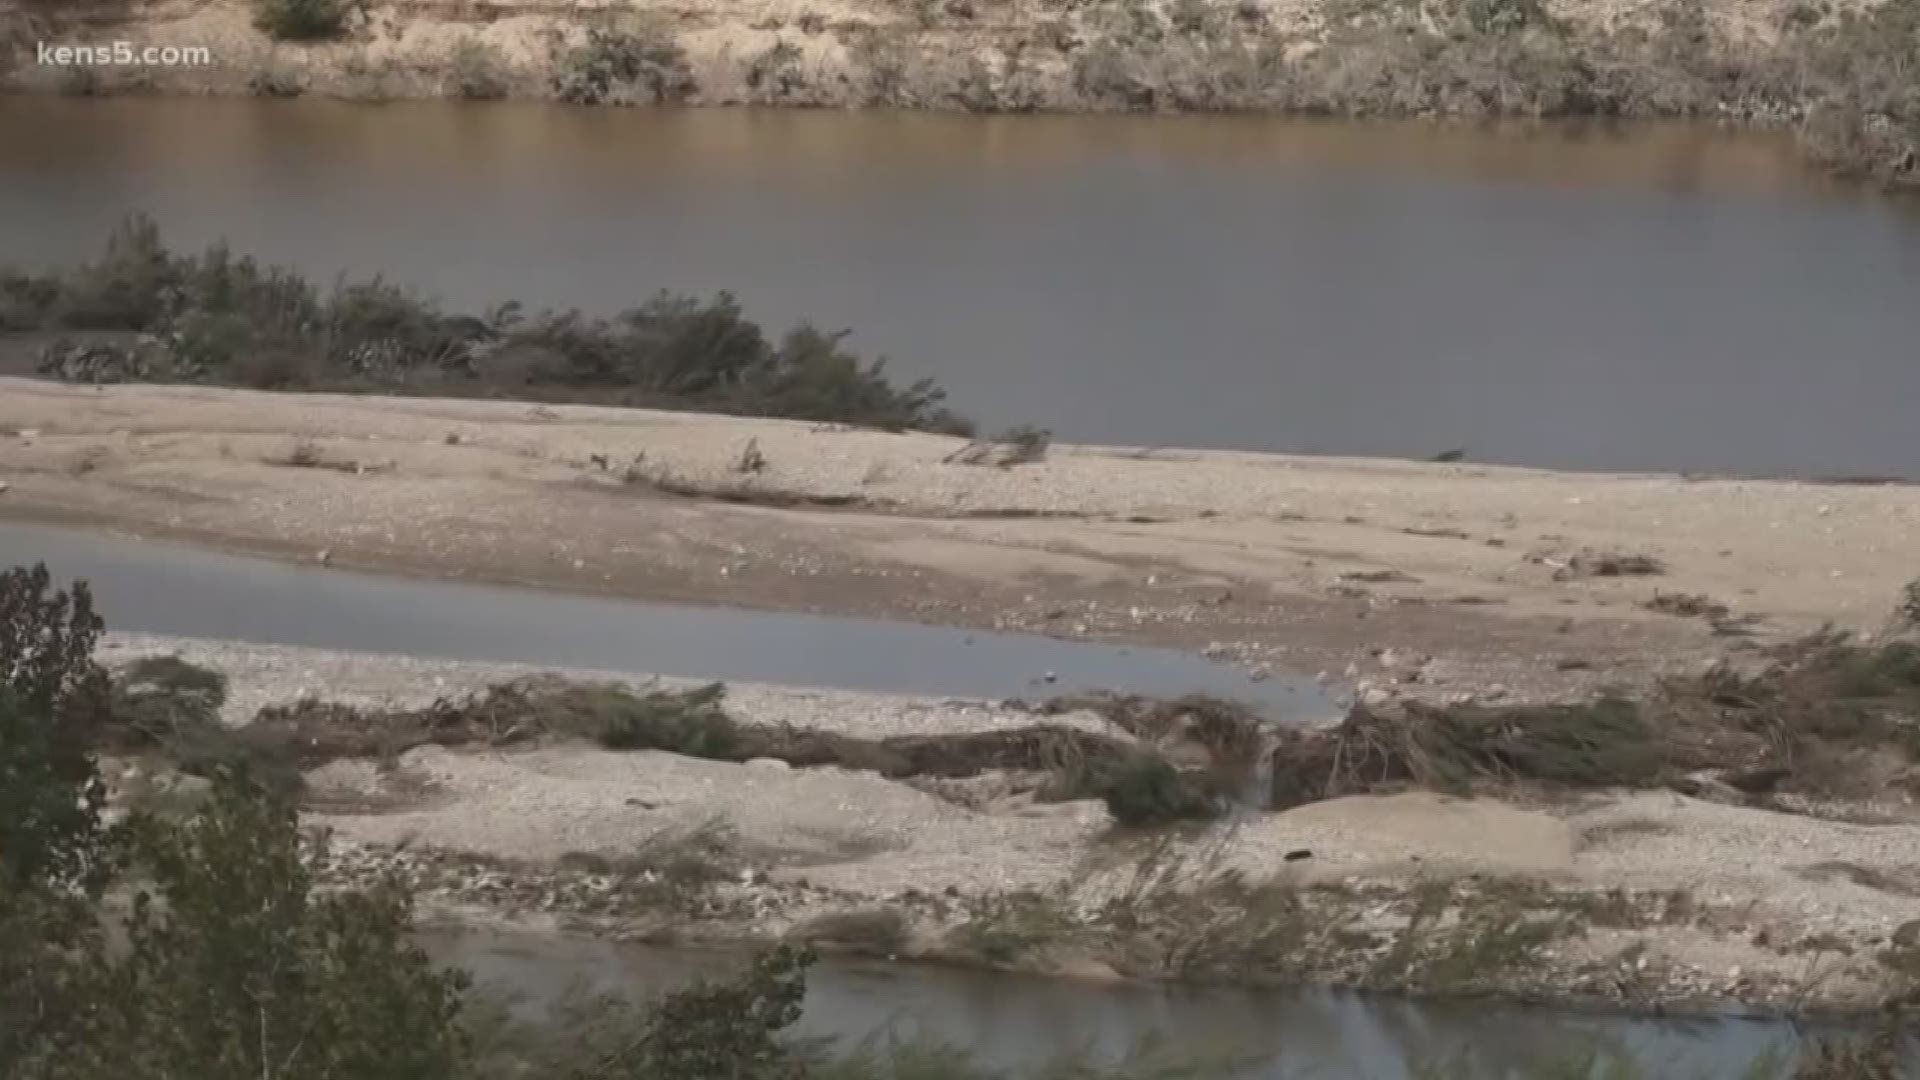 Two bodies have been discovered in the search for four missing people that were swept away in the Llano River flooding on Monday.